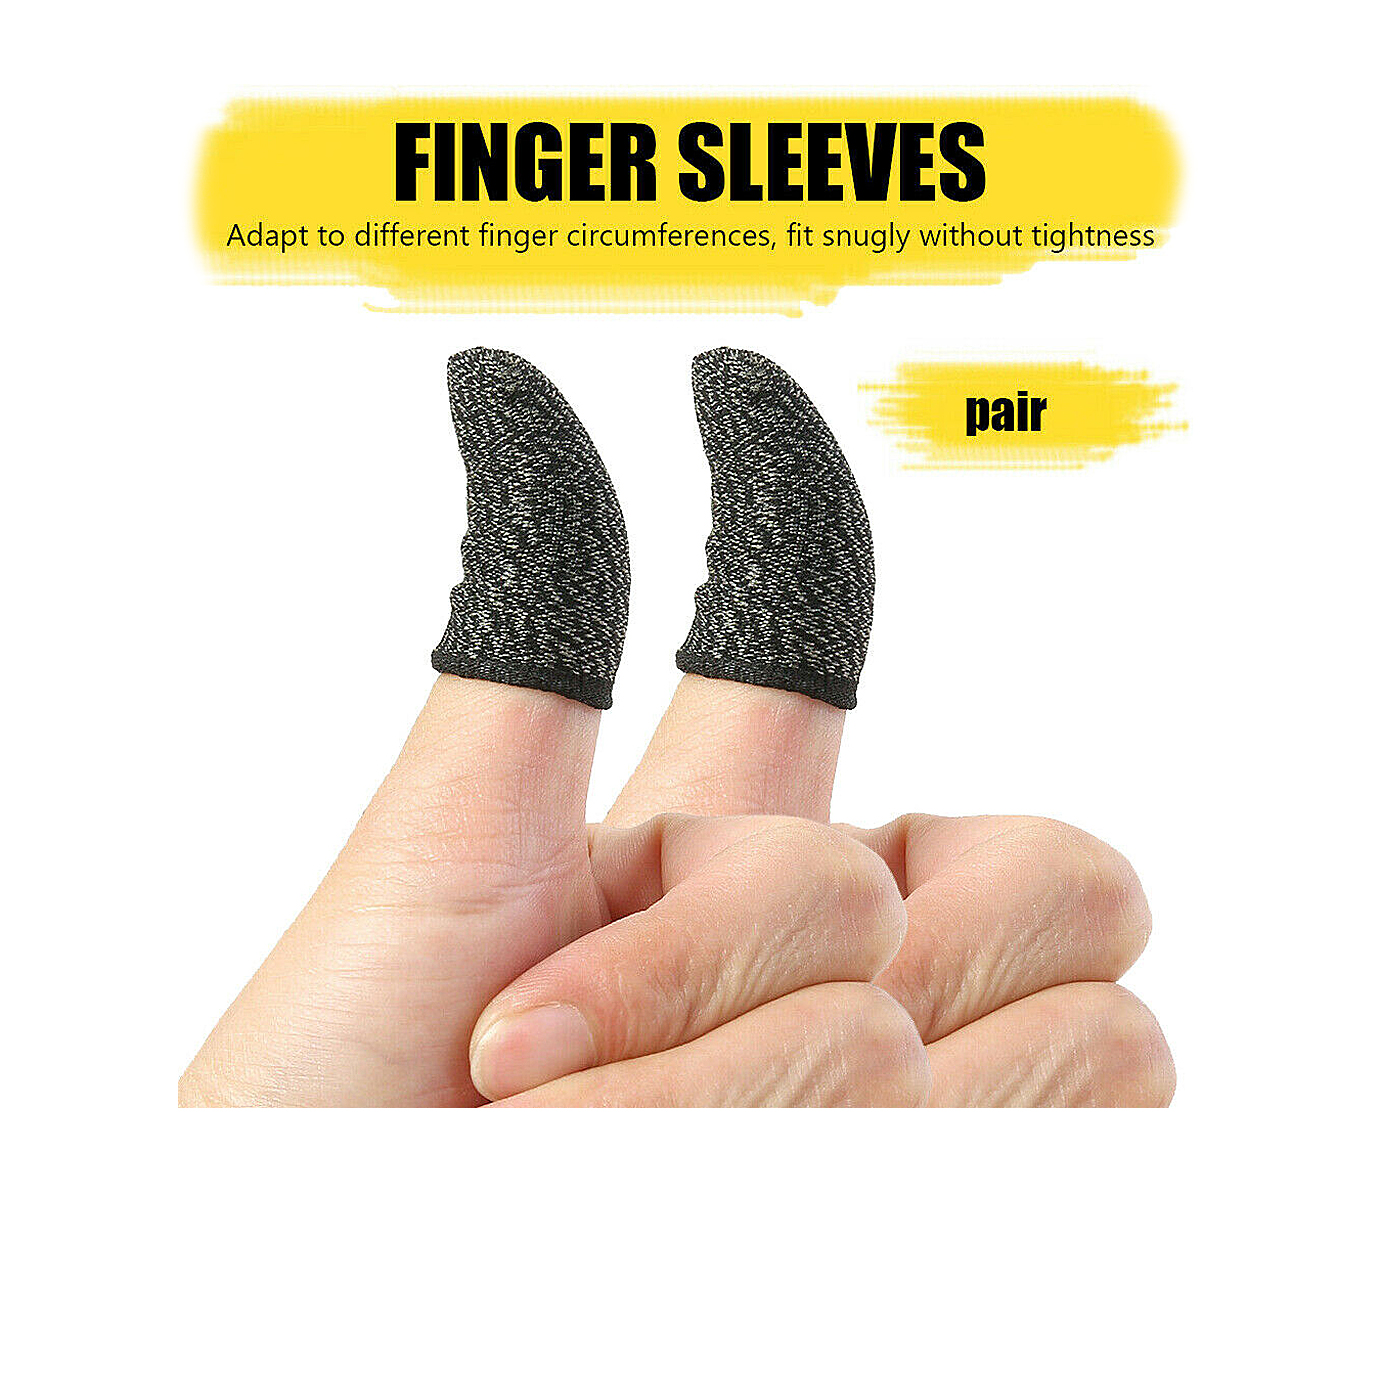 10 Pack Silver Fiber Anti-Sweat Cell Phone Finger Sleeve for Call of Duty Mobile/Rules of Survival for iPhone,Android,ipad Accro Xtrem PUBG Mobile Finger Sleeve Thumb Gaming Gloves 